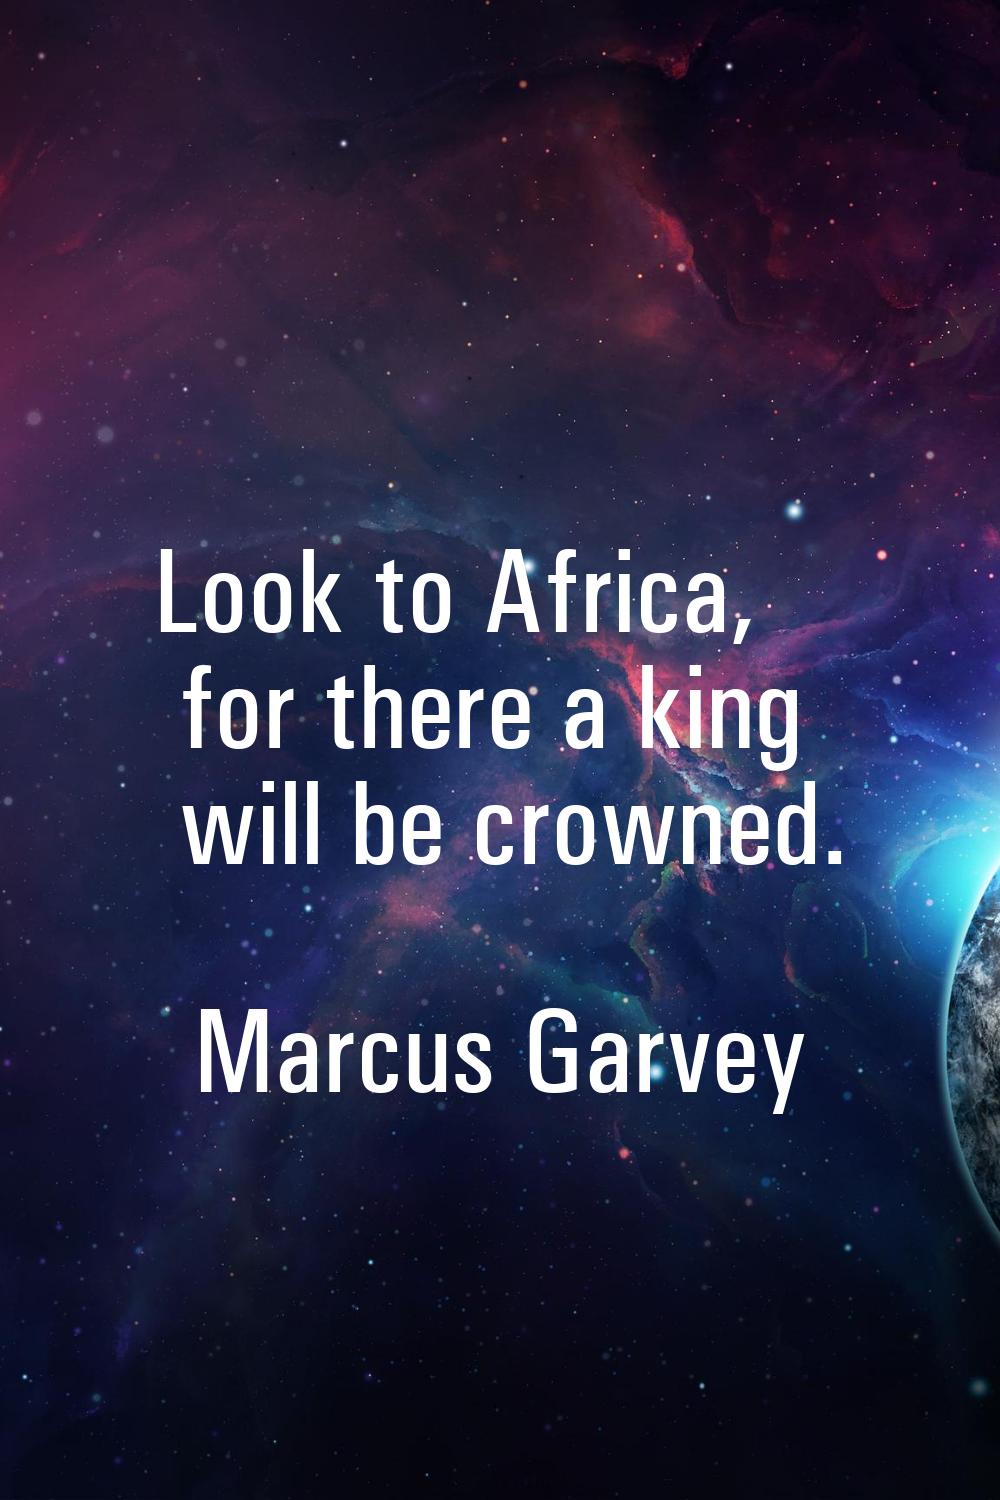 Look to Africa, for there a king will be crowned.